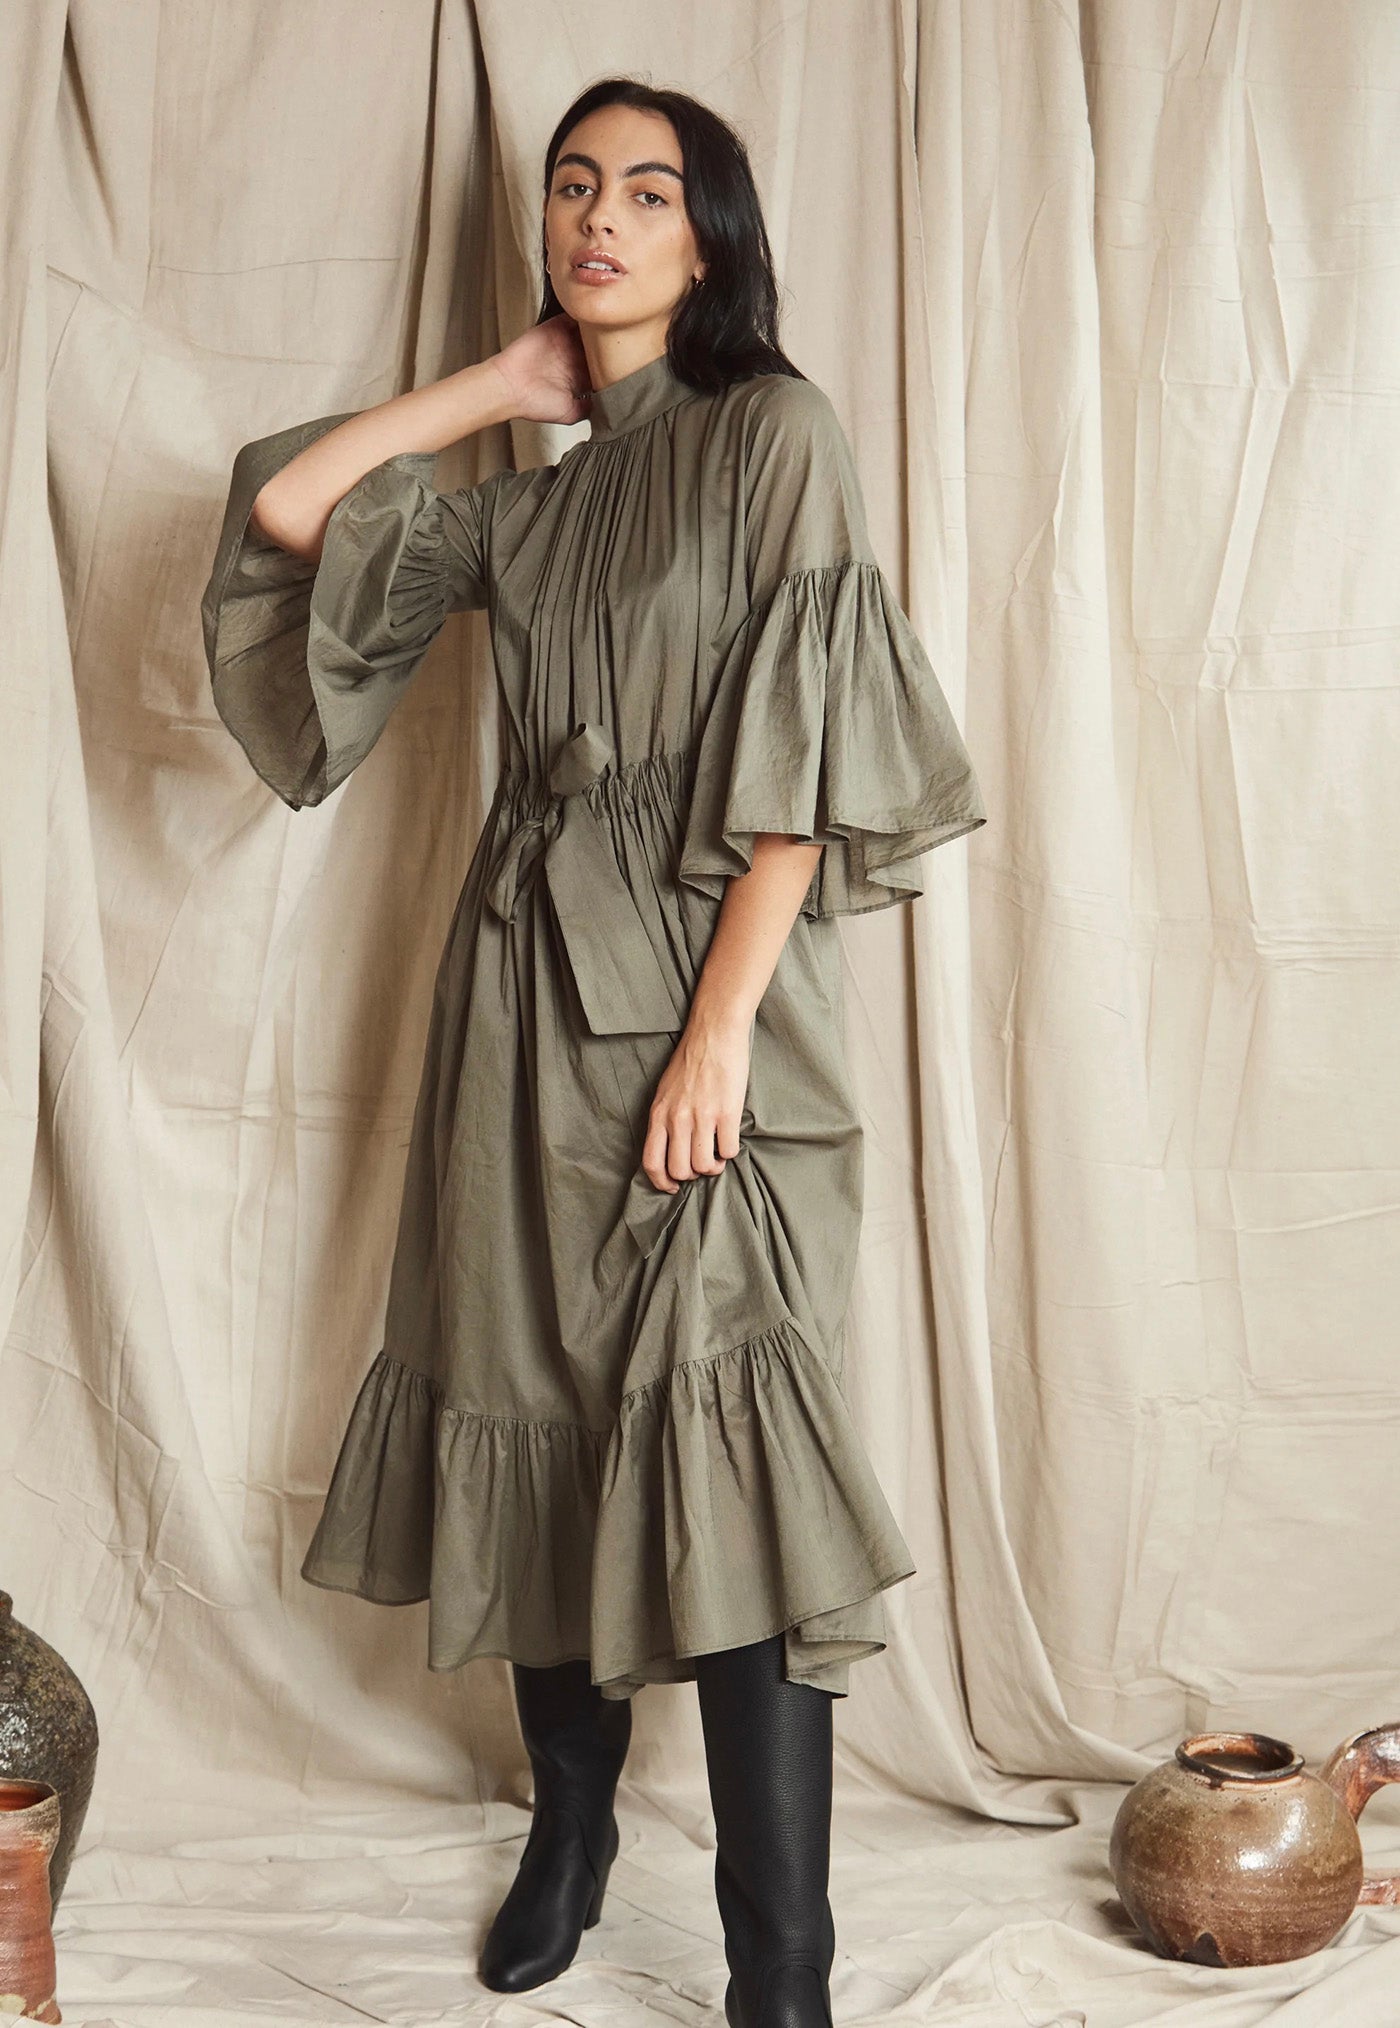 O'Keeffe Dress - Sage Cotton Voile sold by Angel Divine